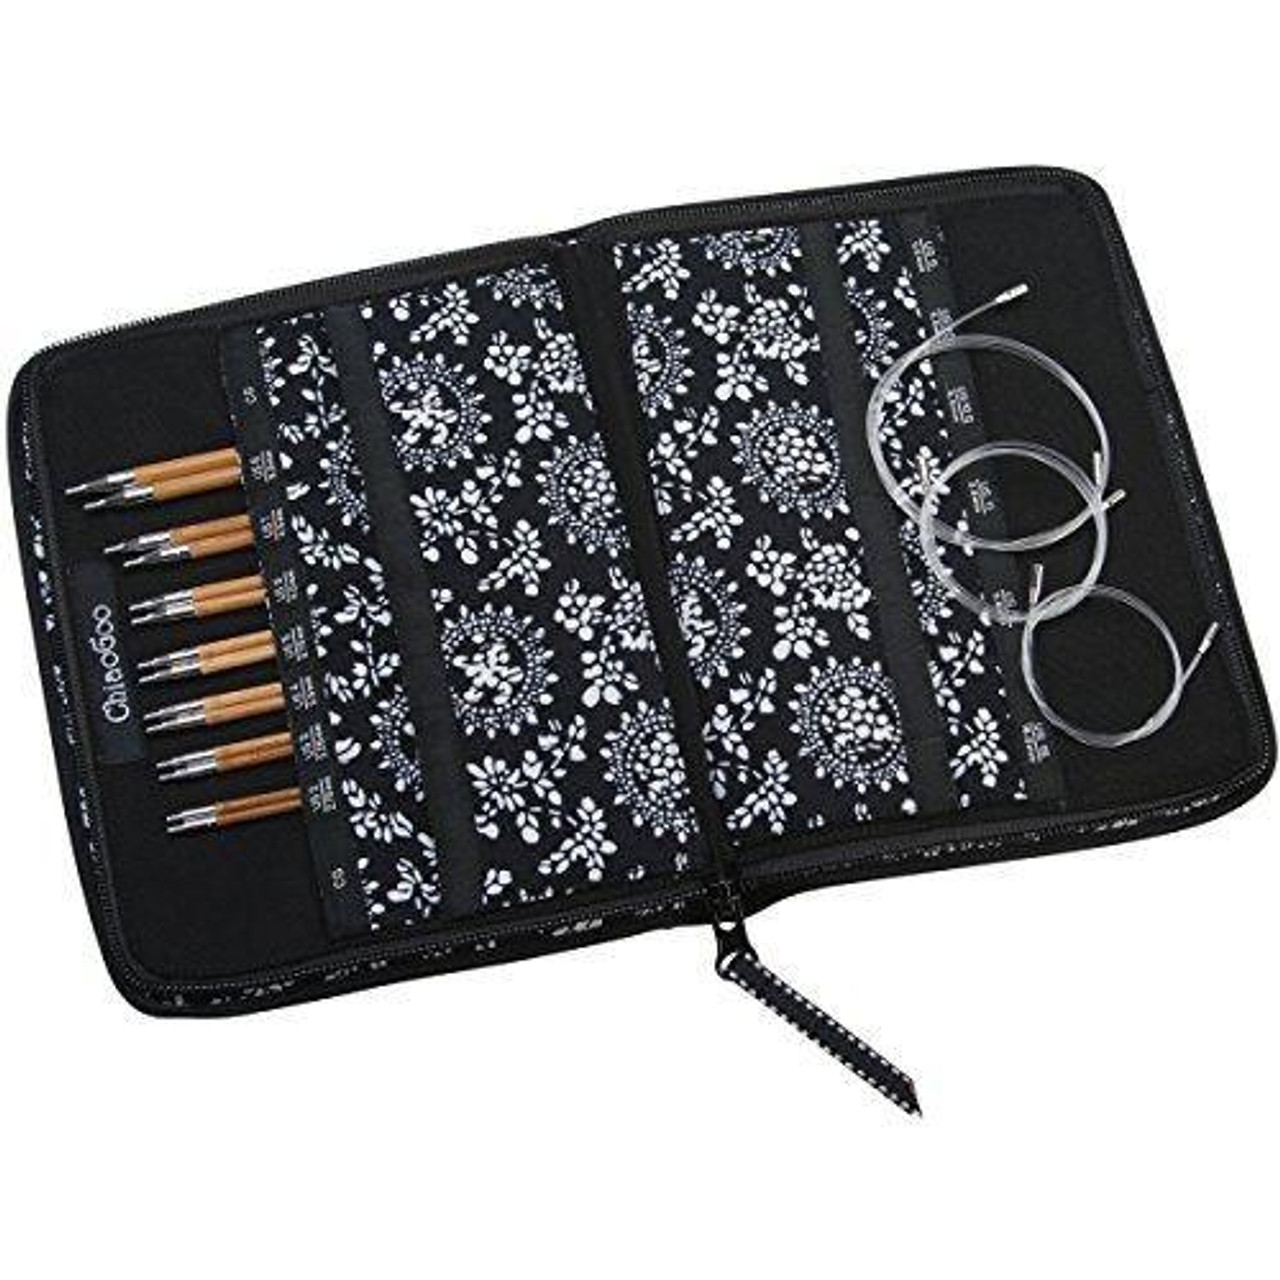 ChiaoGoo Spin Bamboo Interchangeable Knitting Needle 4 Tip Set-Complete